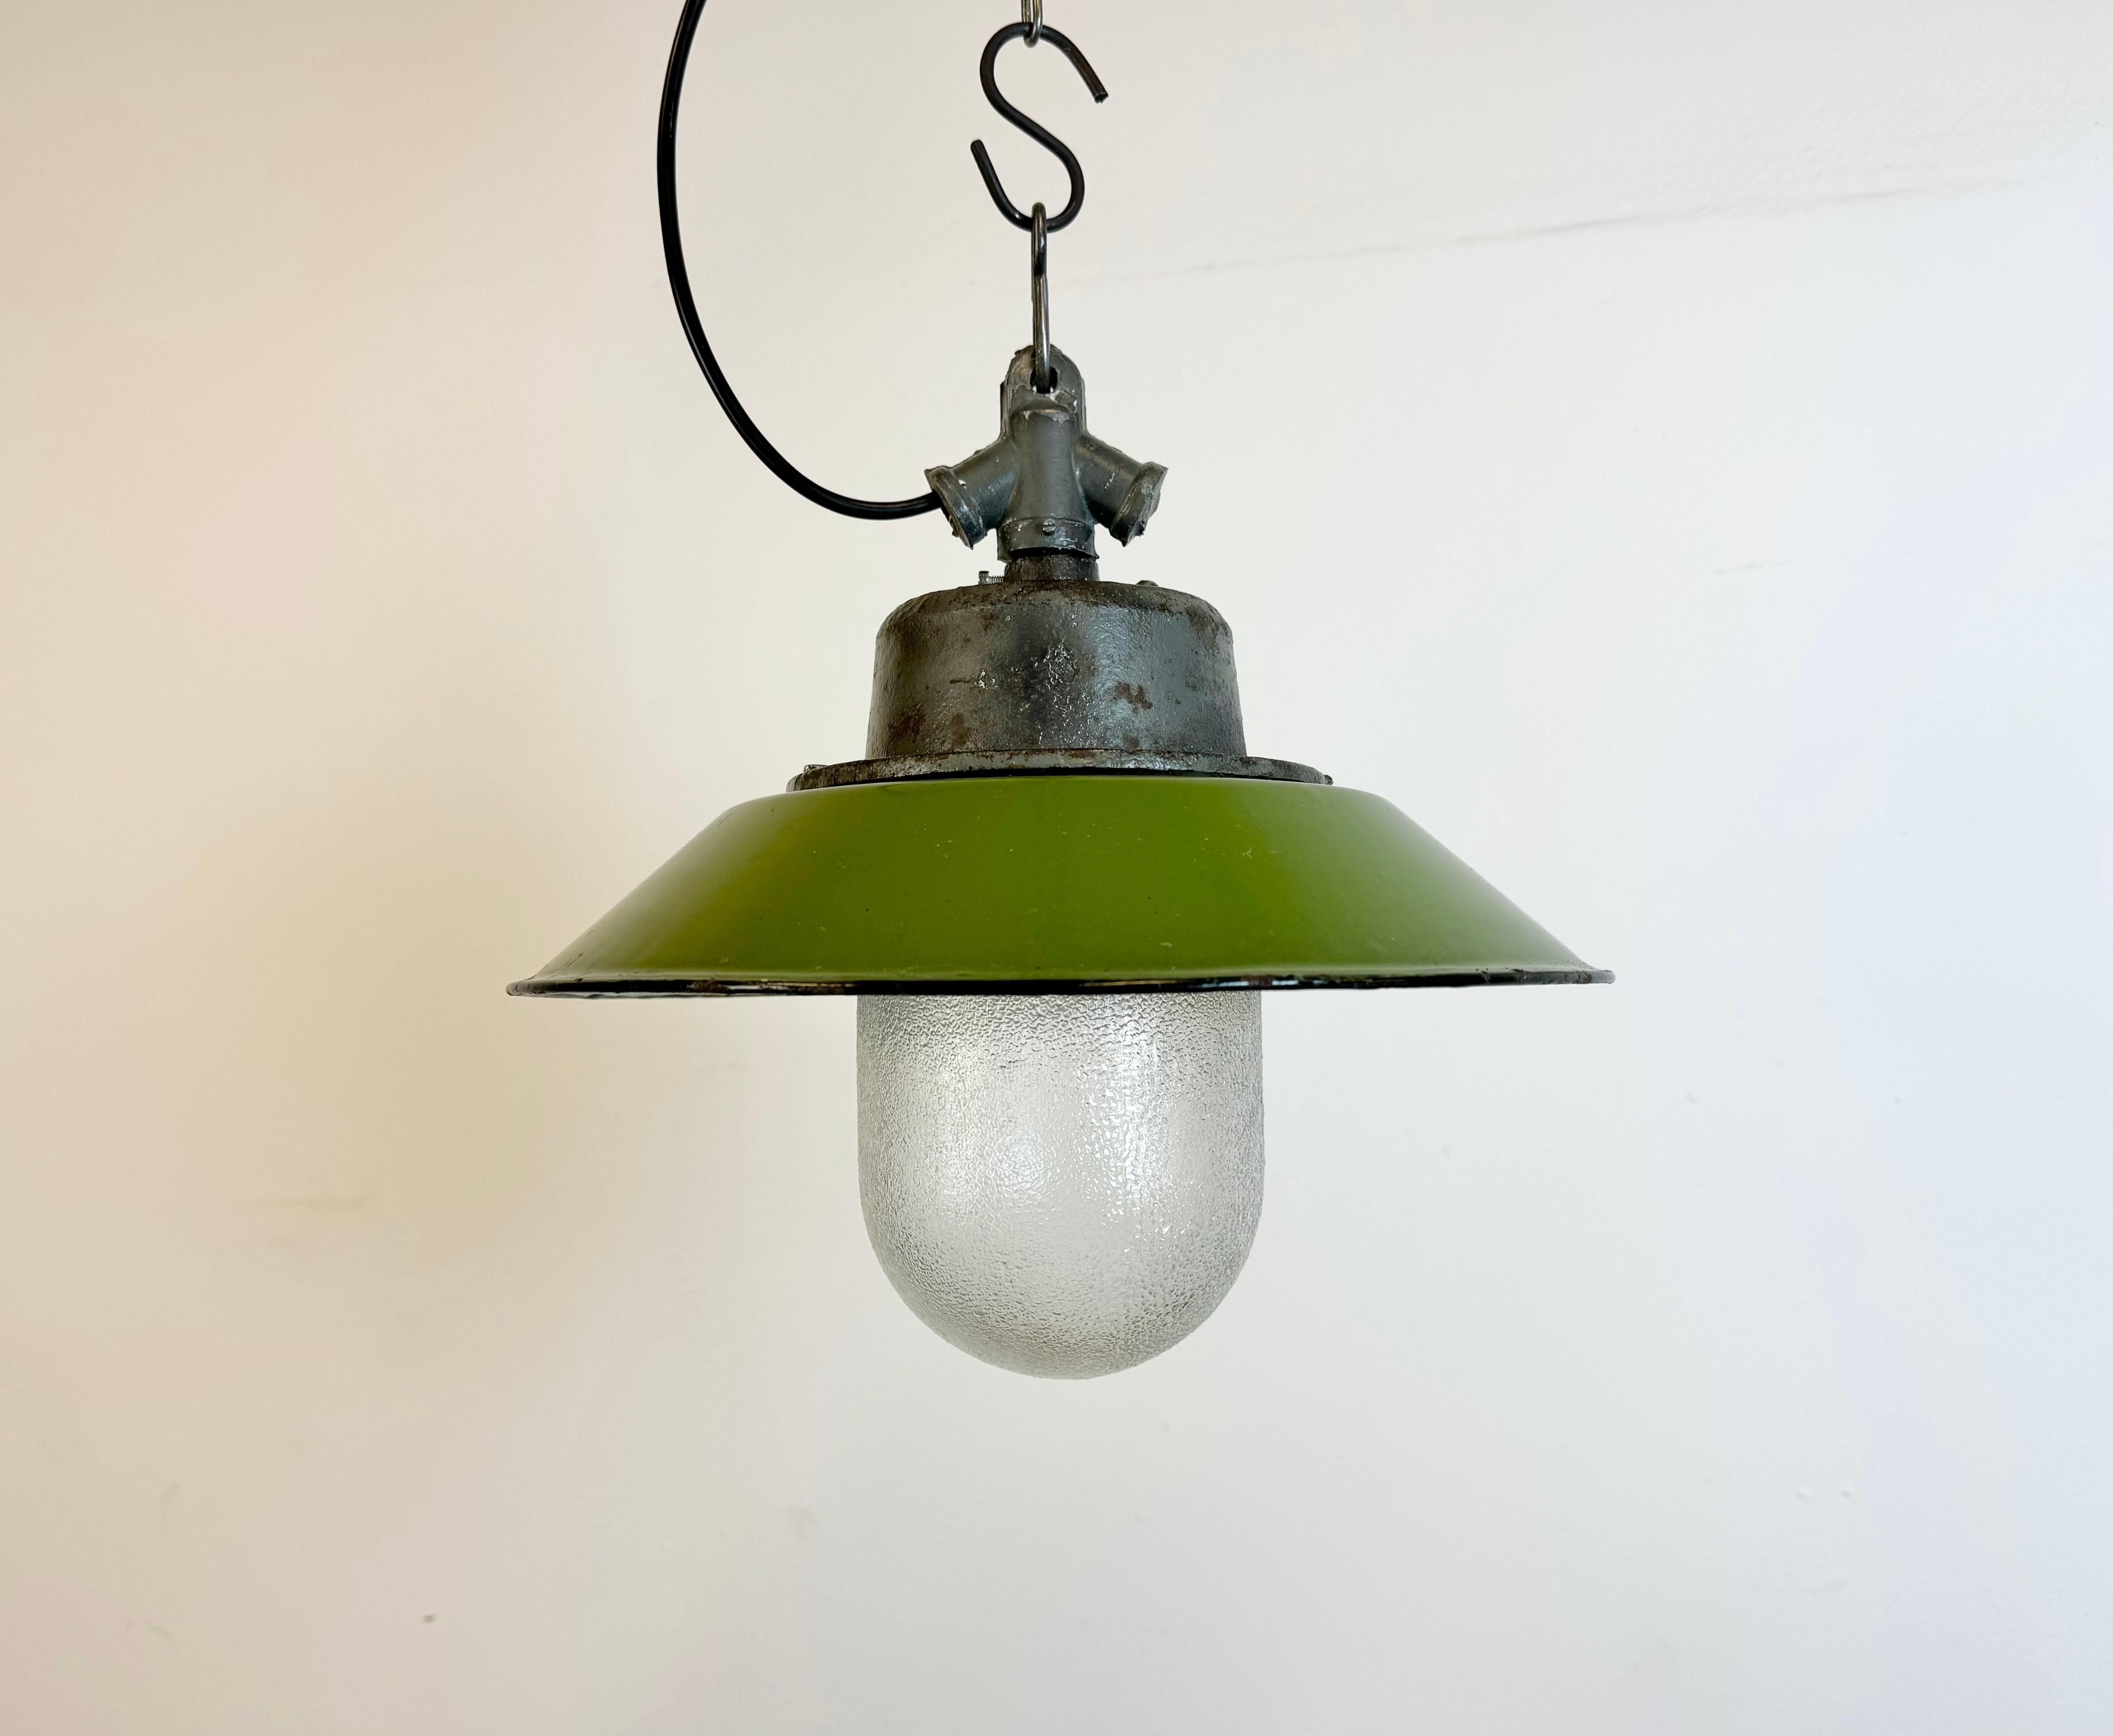 Industrial hanging lamp manufactured in Poland during the 1960s. It features a green enamel shade with white enamel interior, a cast iron top and a frosted glass cover. The porcelain socket requires standard E 27/ E26 lightbulbs .New wire. The